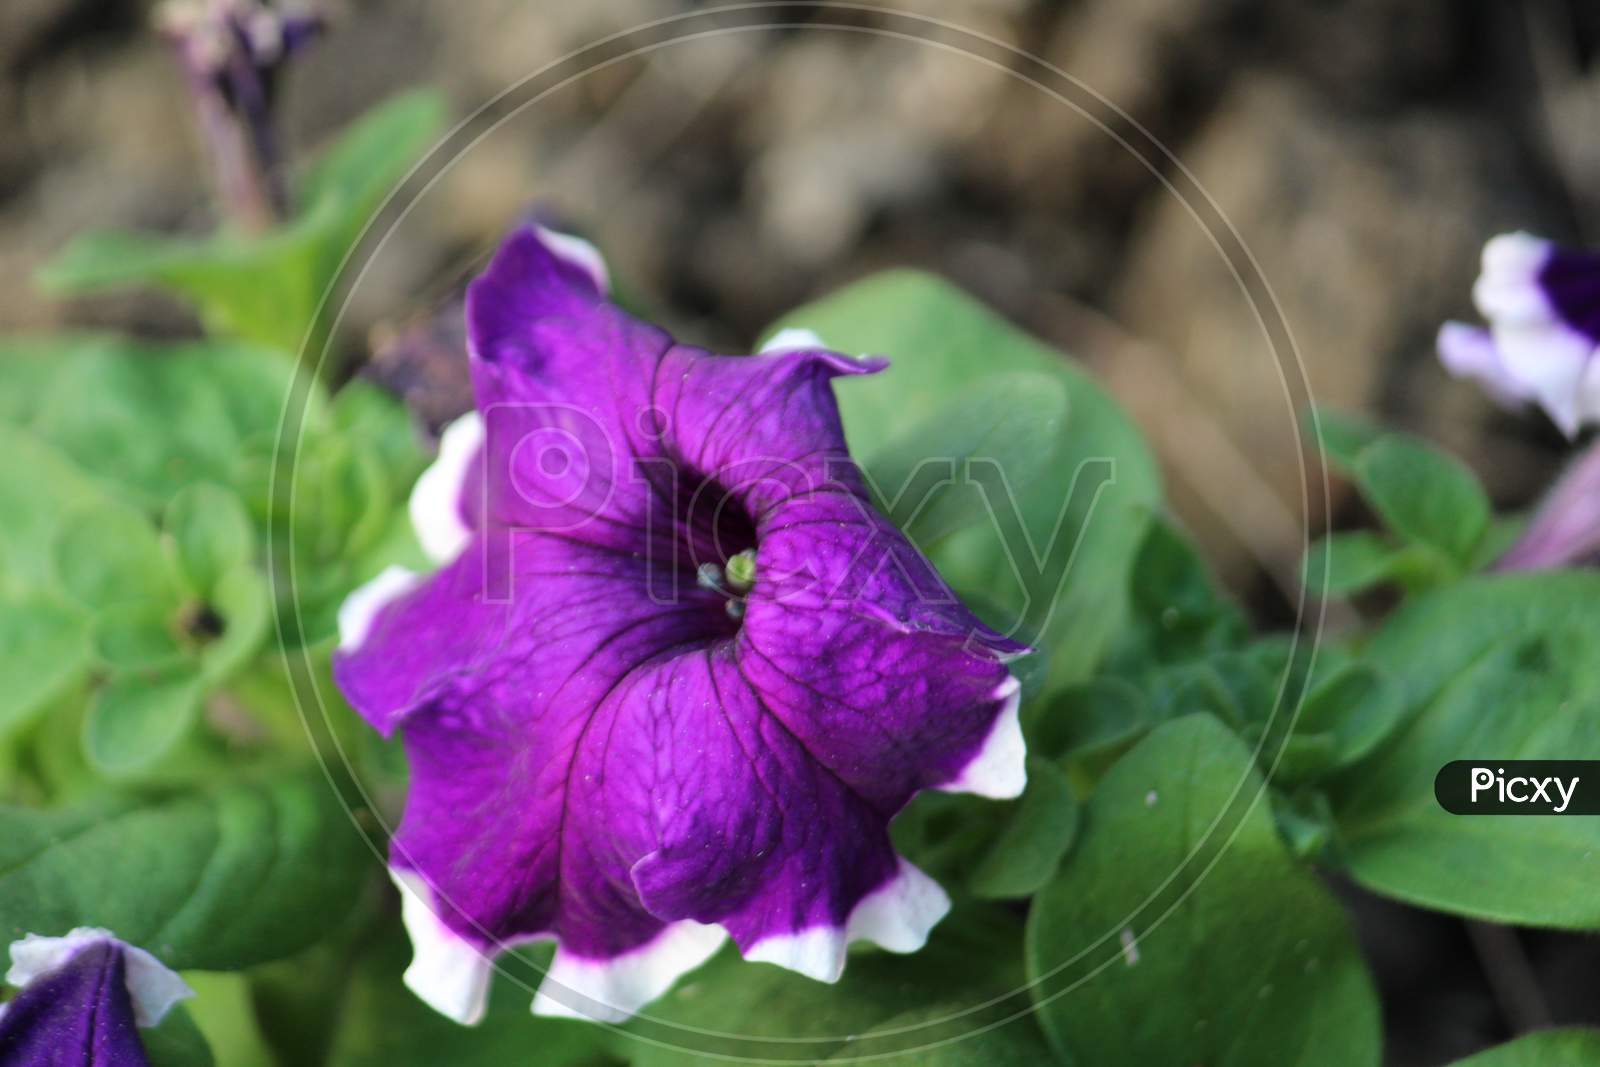 Purple White Petunia with green leaves on a bright sunlight.